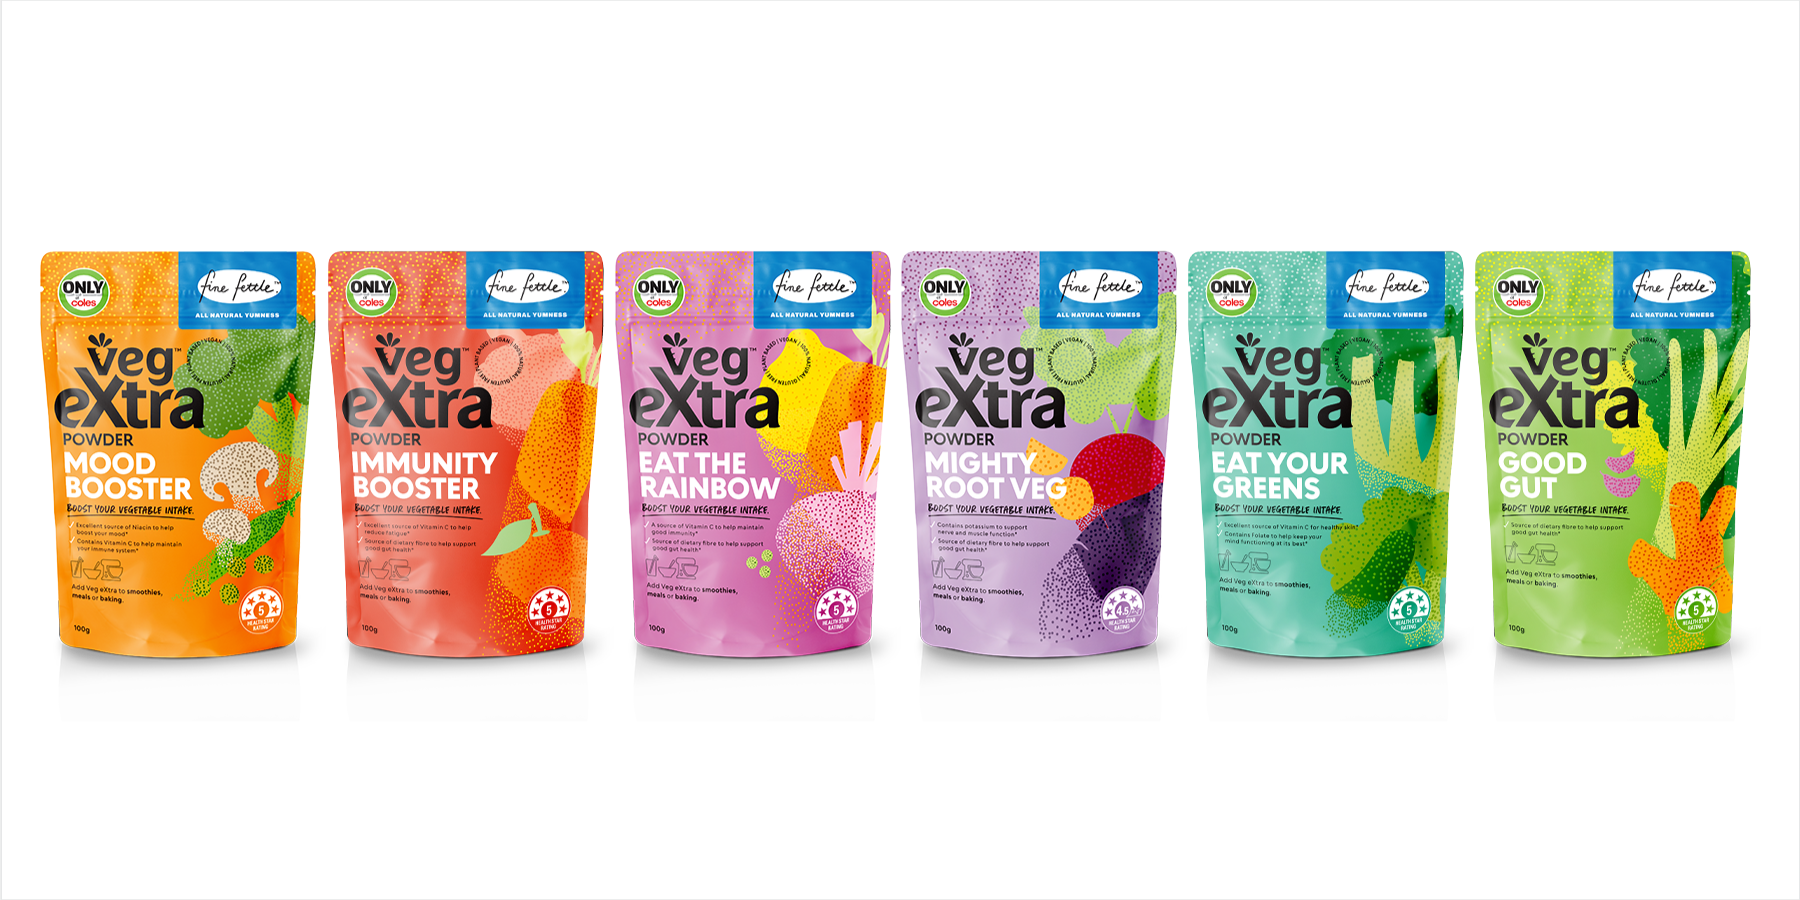 Veg eXtra Powder - Only Available in Coles